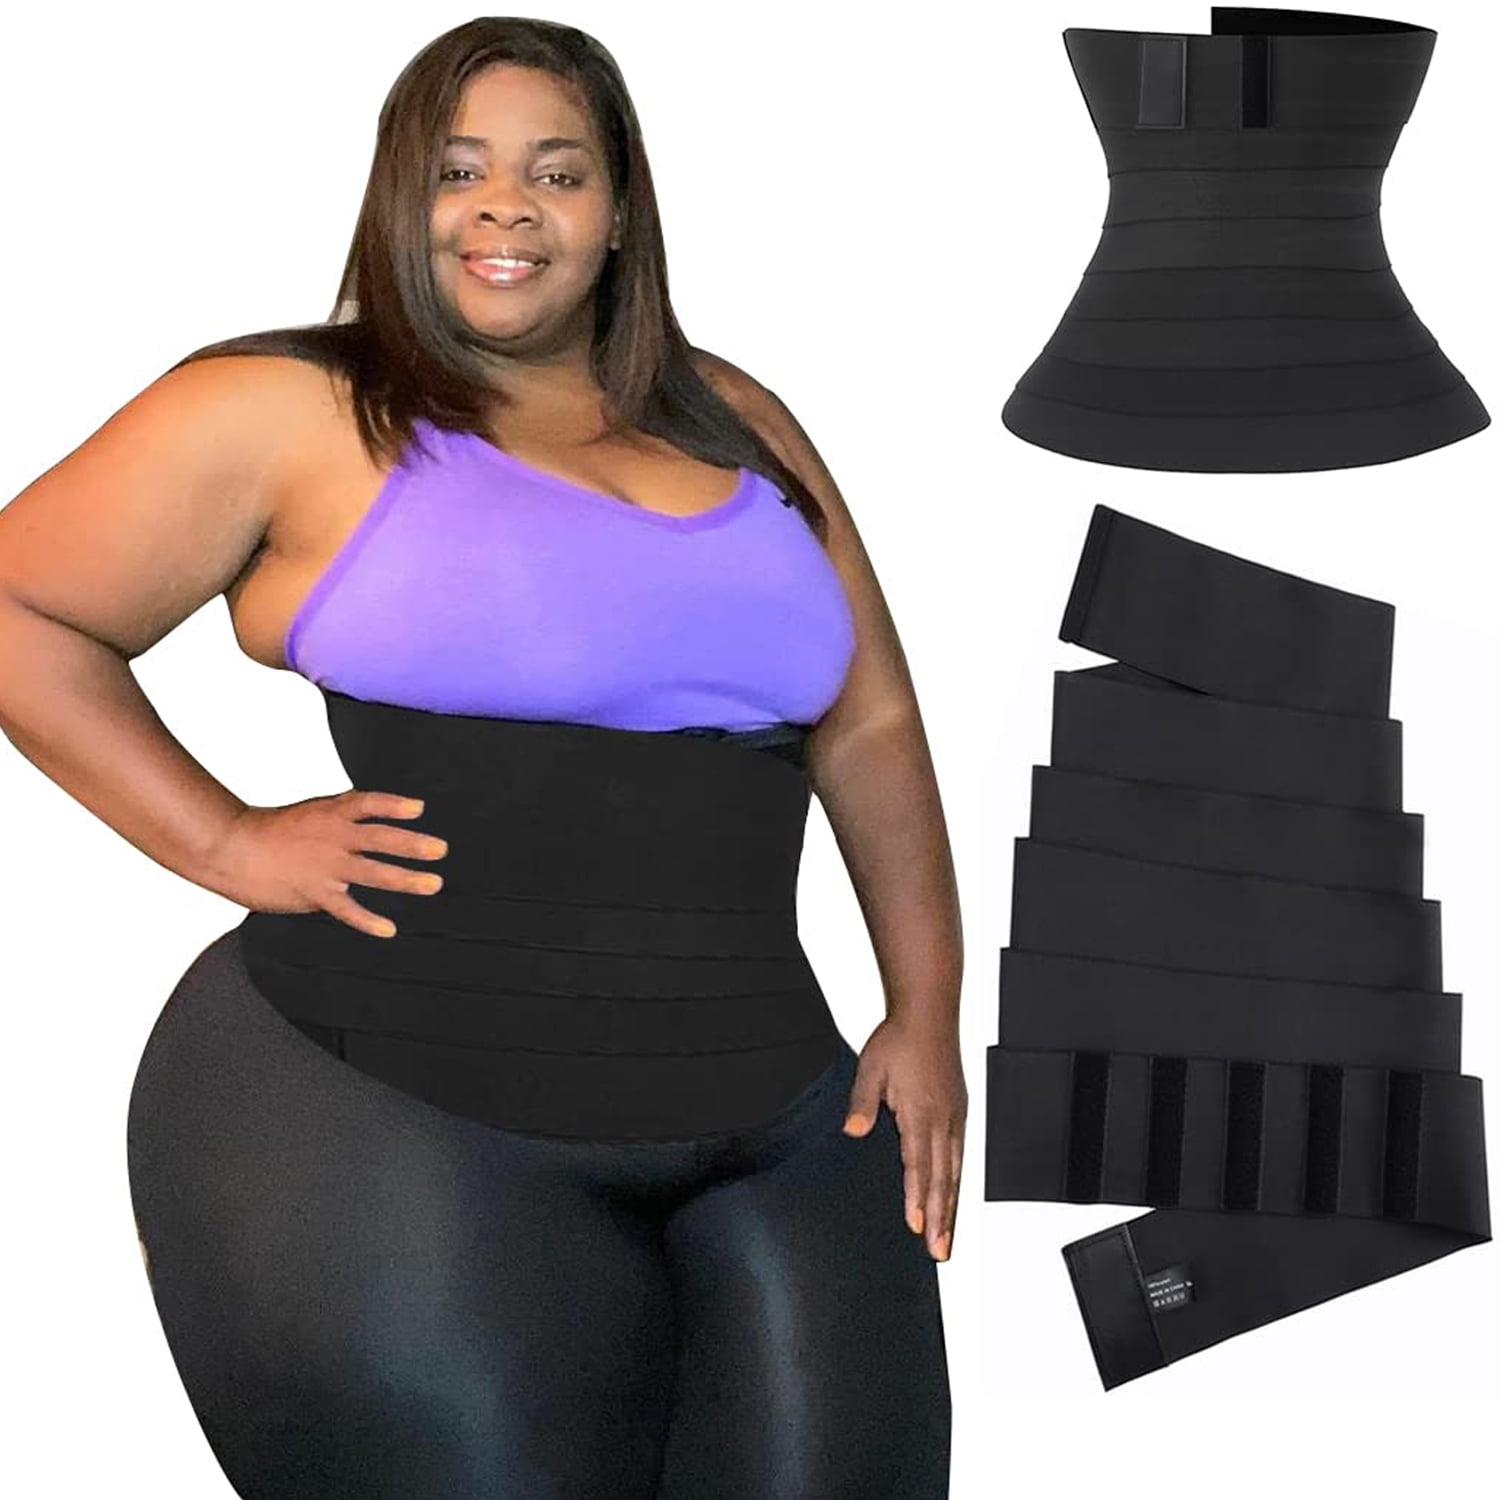 MECAPO Women's Waist Trainer Wrap - Plus Size, Adjustable & Non-Slip, for  Stomach, Lower Belly Fat, Post Partum Support